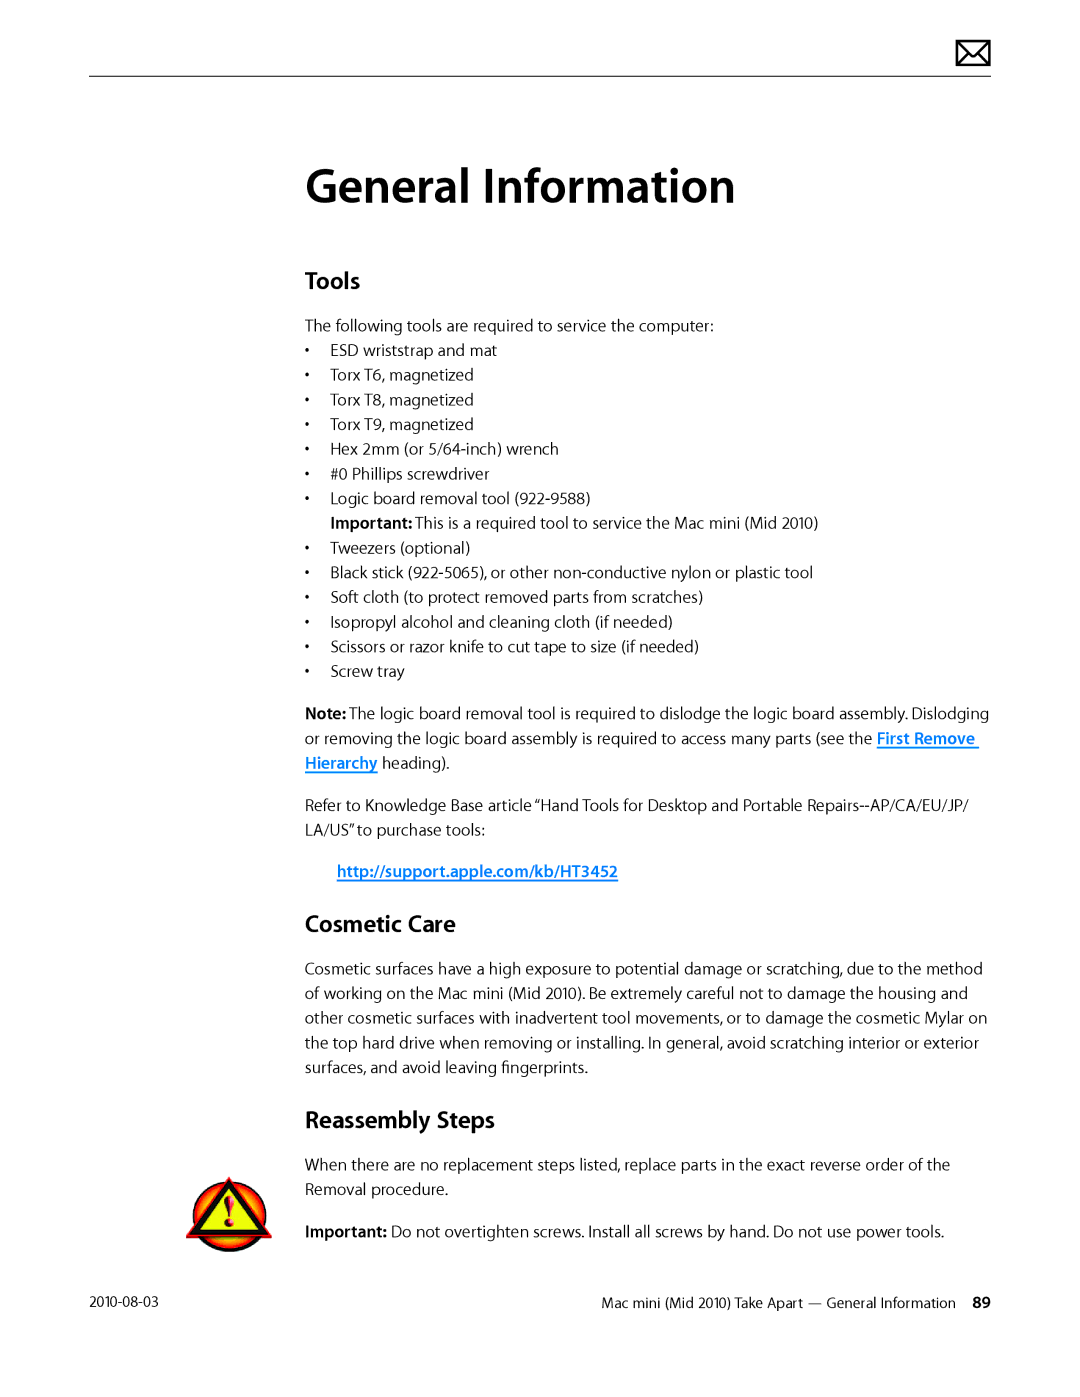 Apple Mac mini manual General Information, Tools, Cosmetic Care, Reassembly Steps 